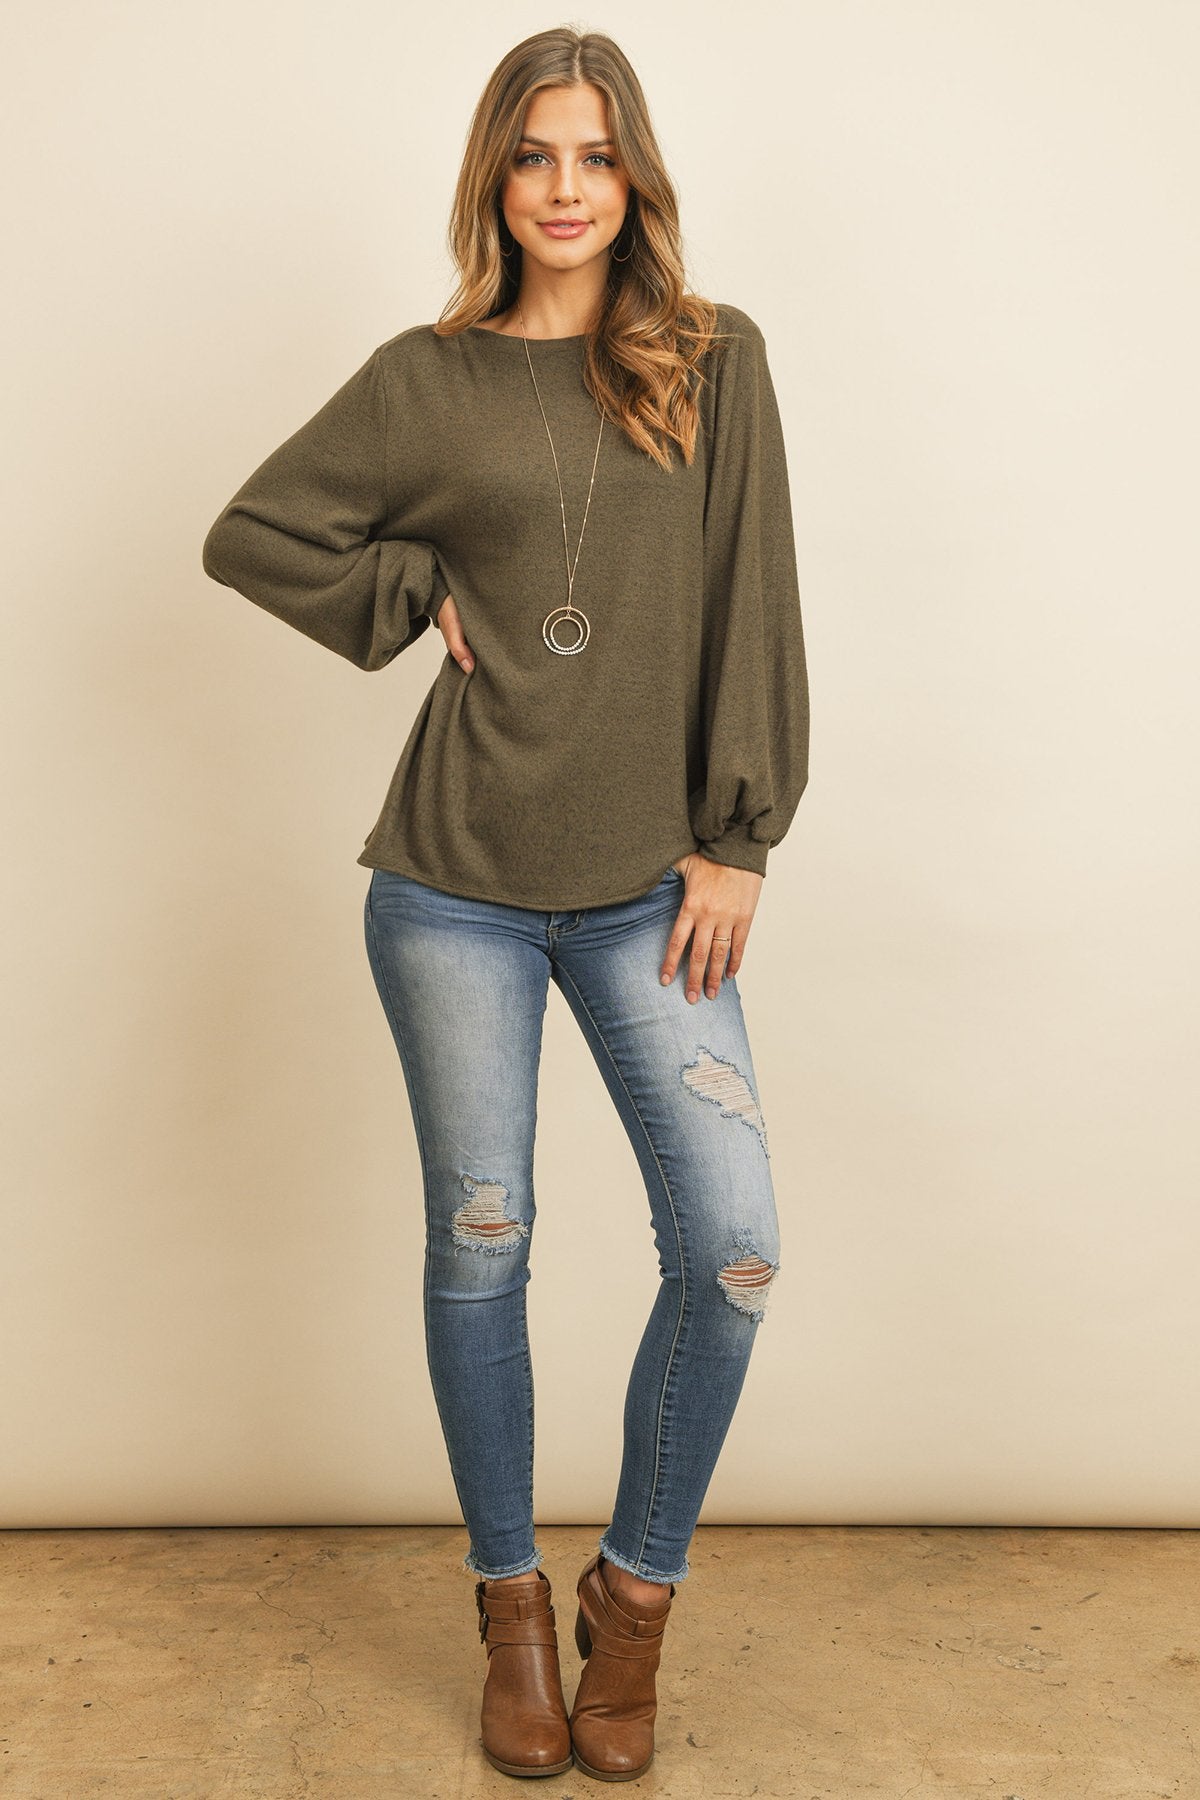 Puff Sleeved Boat Neck Two Toned Brushed Hacci Top - LOLA LUXE